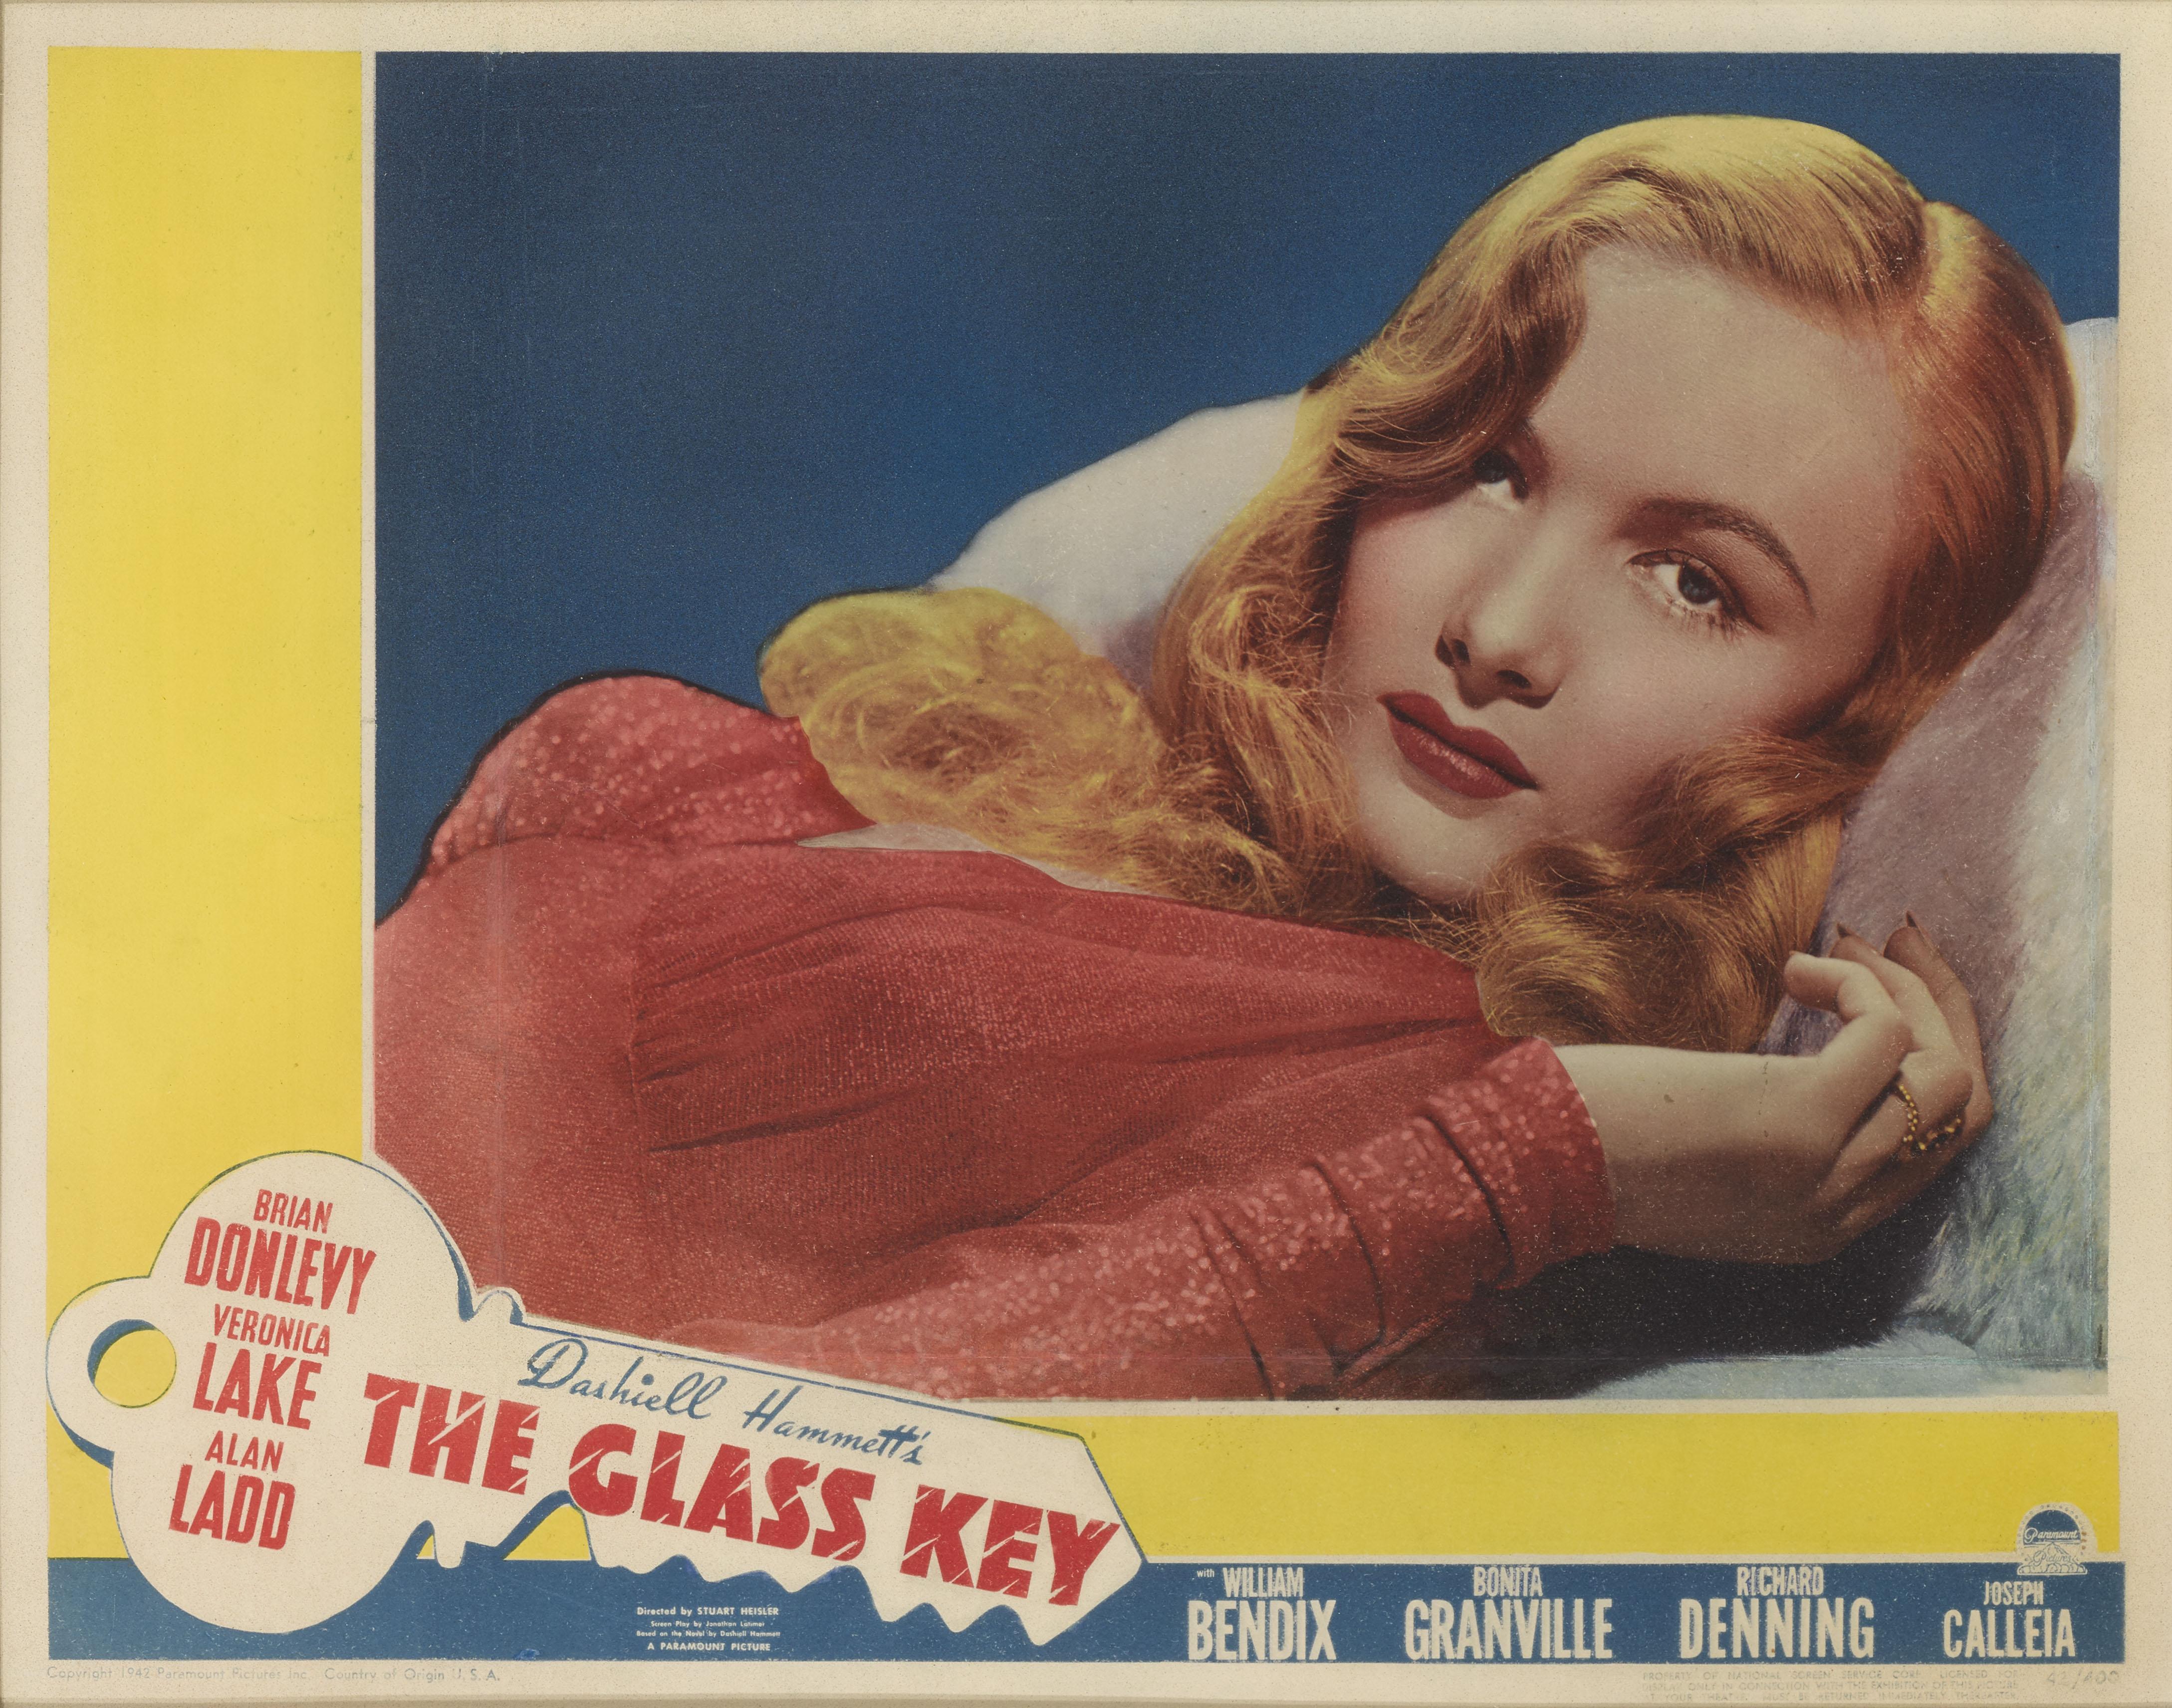 Original US lobby card for the 1942 Film Noir The Glass Key.
This film starred Alan Ladd and Veronica Lake.
This lobby card is conservation framed with UV plexiglass in an Obeche wood frame with card mounts and UV plexiglass. The Size given is